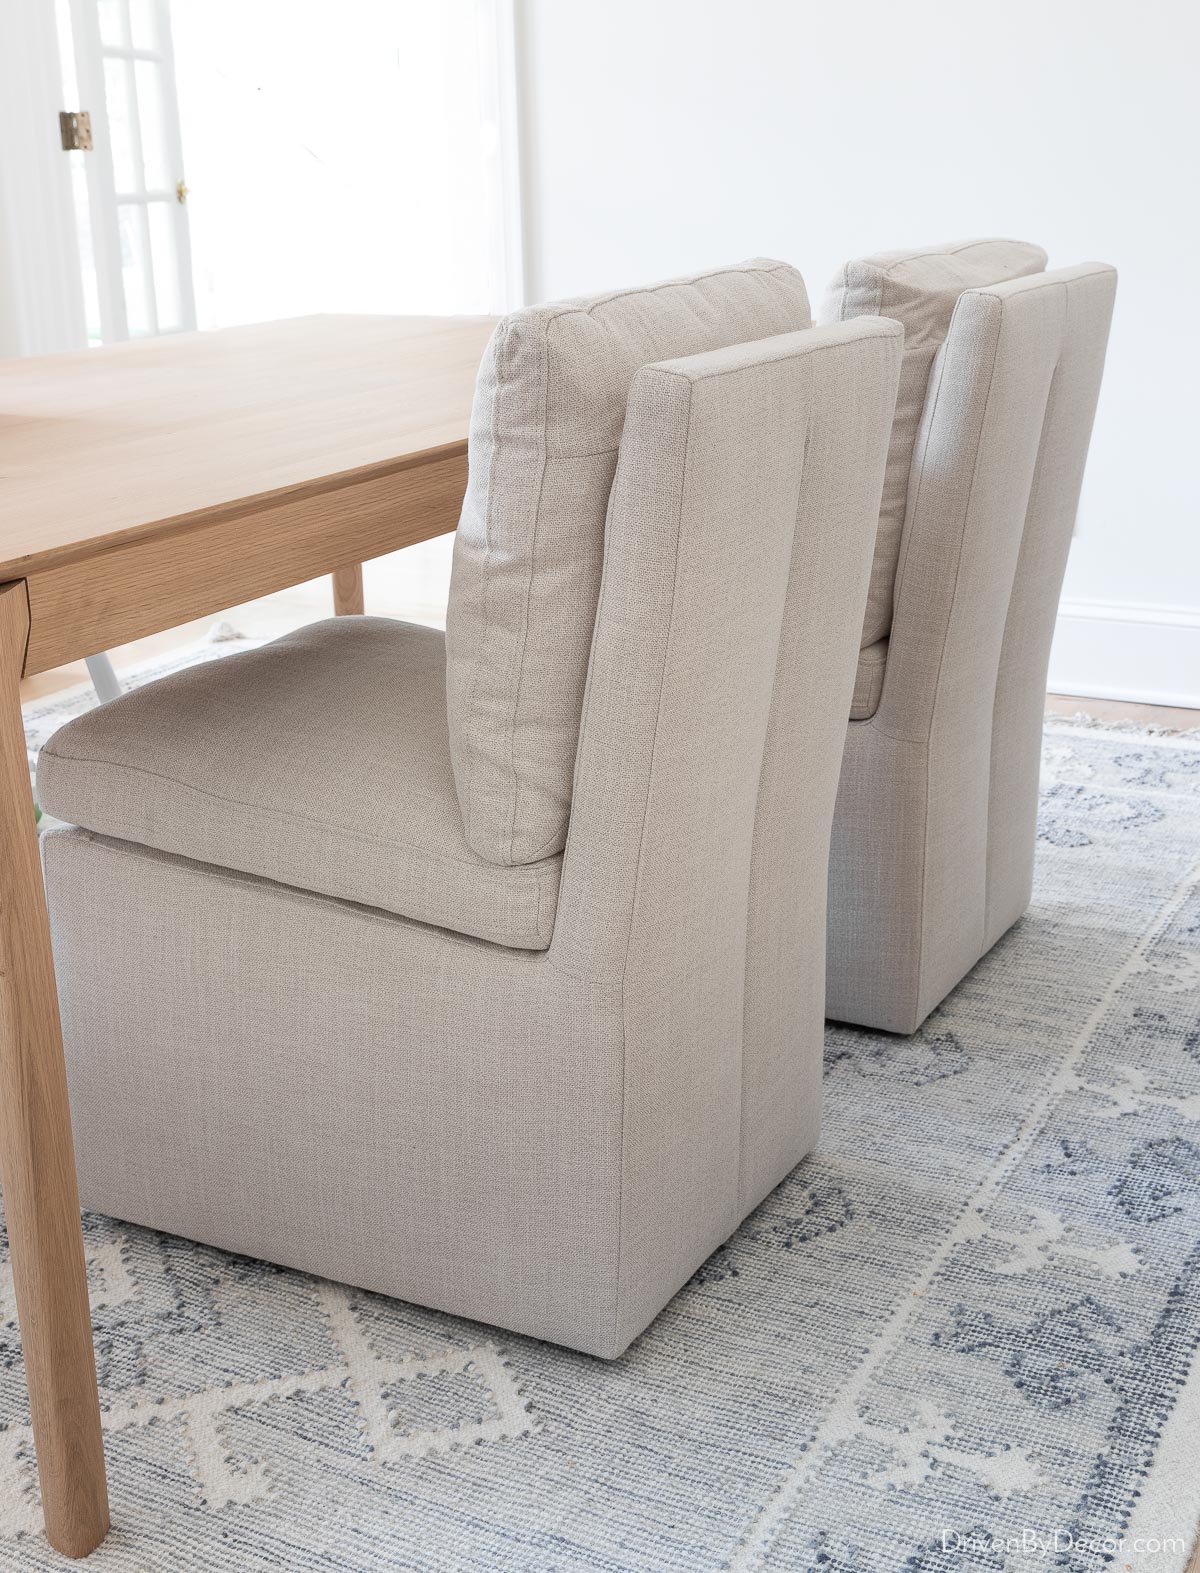 Upholstered dining chairs with detailing on the back